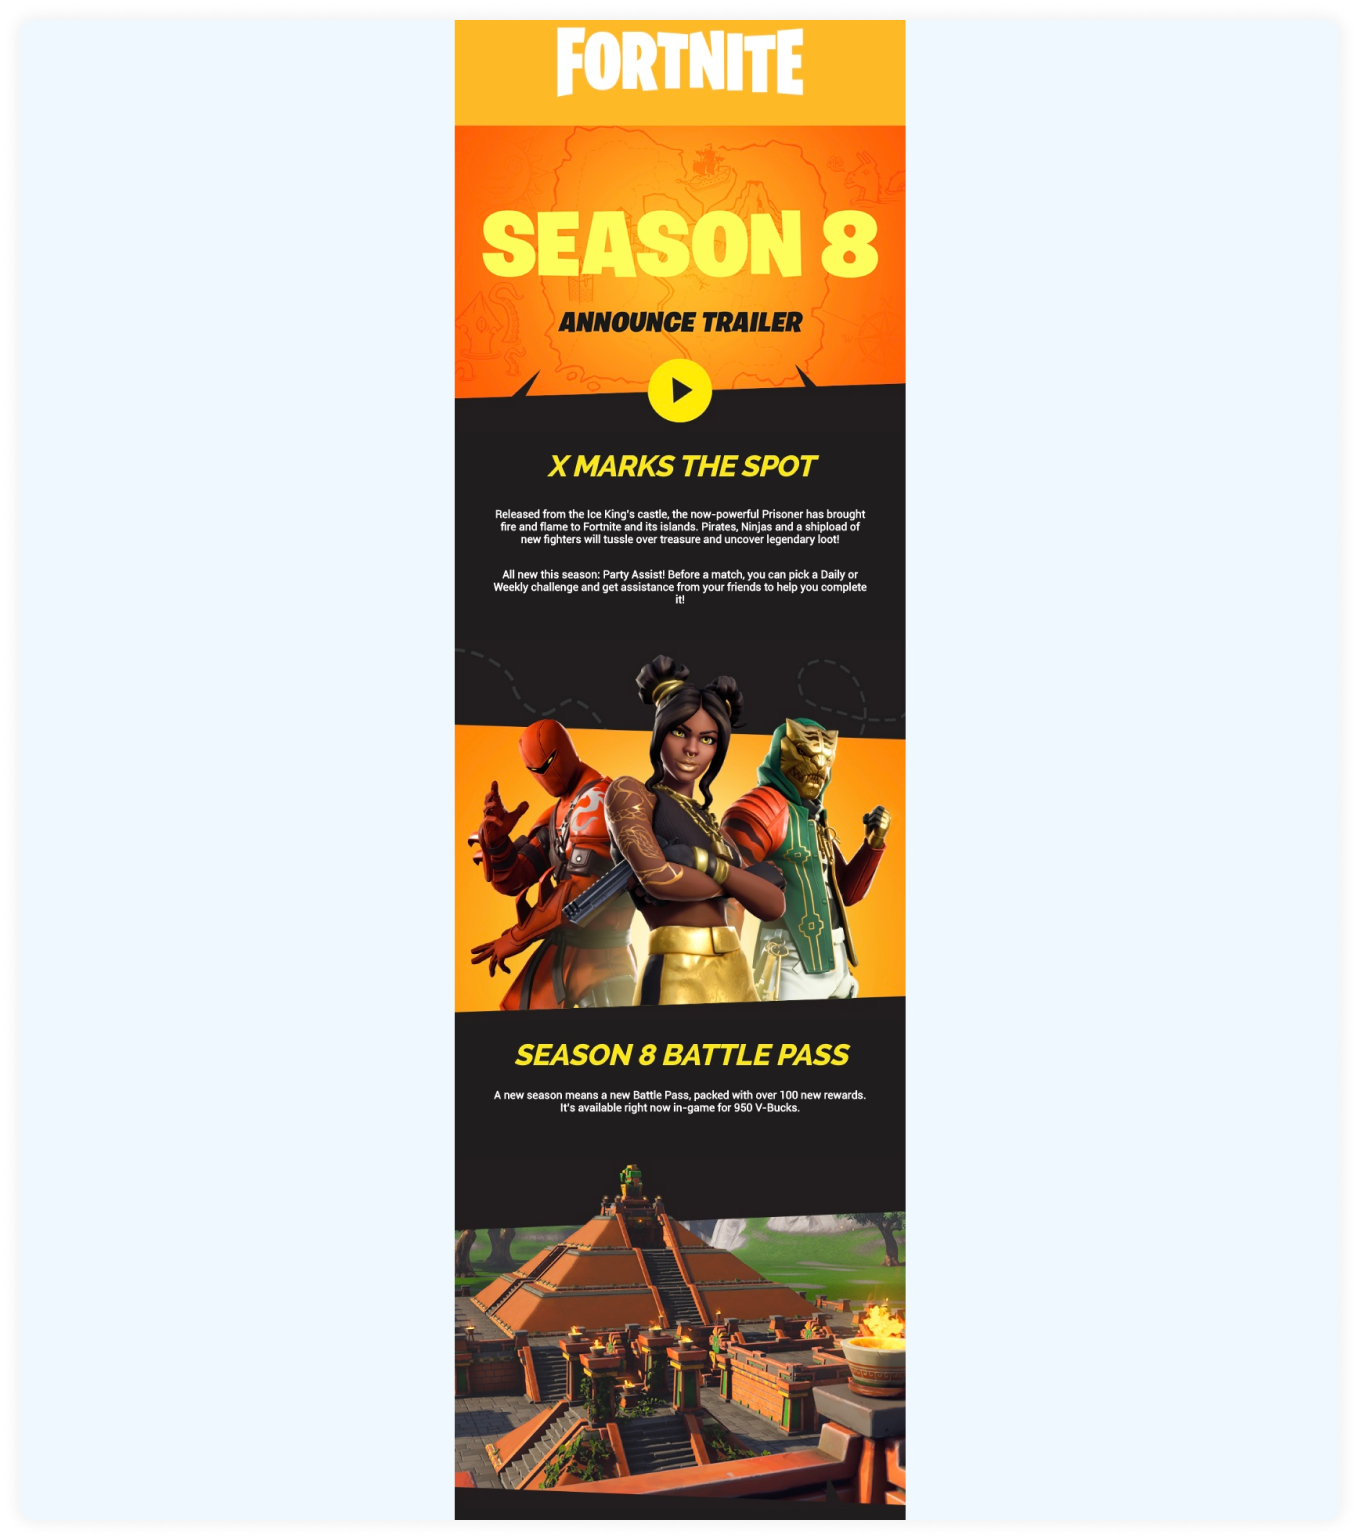 Gaming industry email template by Fortnite